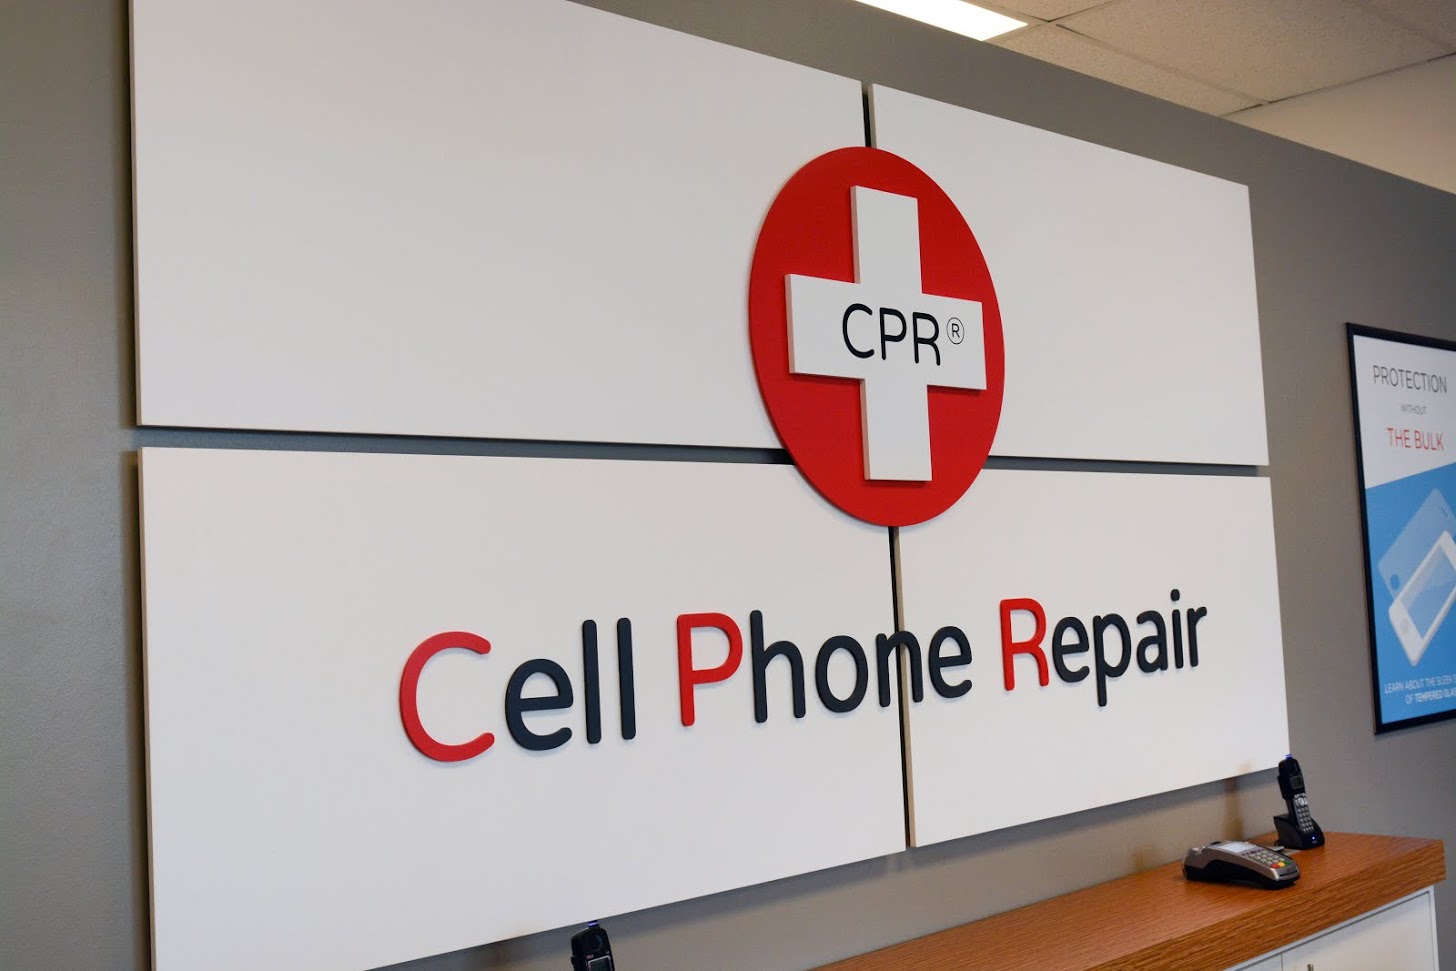 CPR Cell Phone Repair, Thursday, January 25, 2018, Press release picture